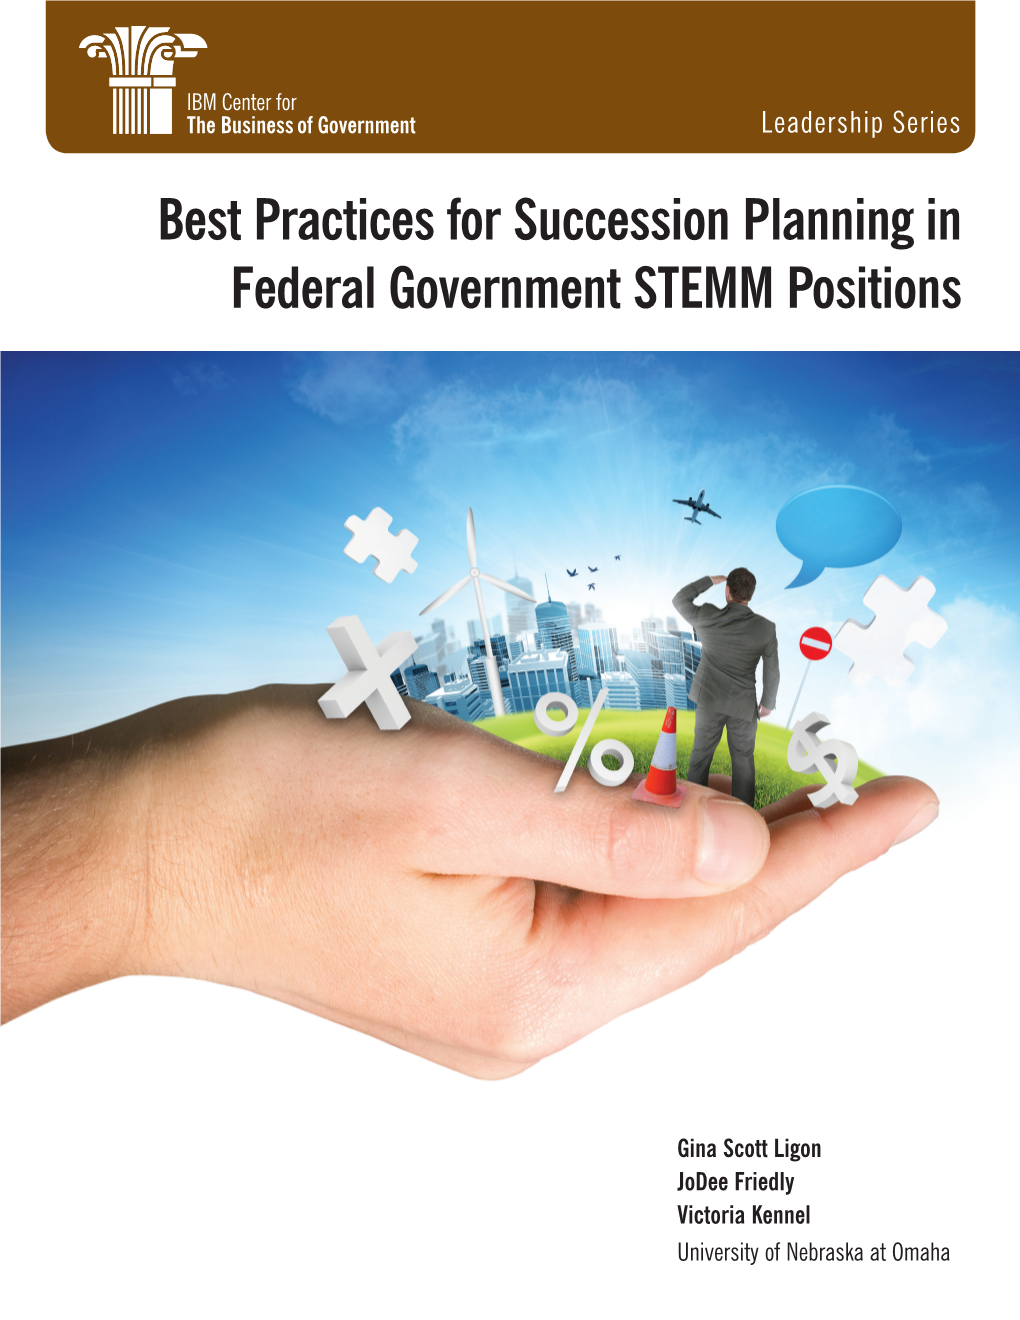 Best Practices for Succession Planning in Federal Government STEMM Positions